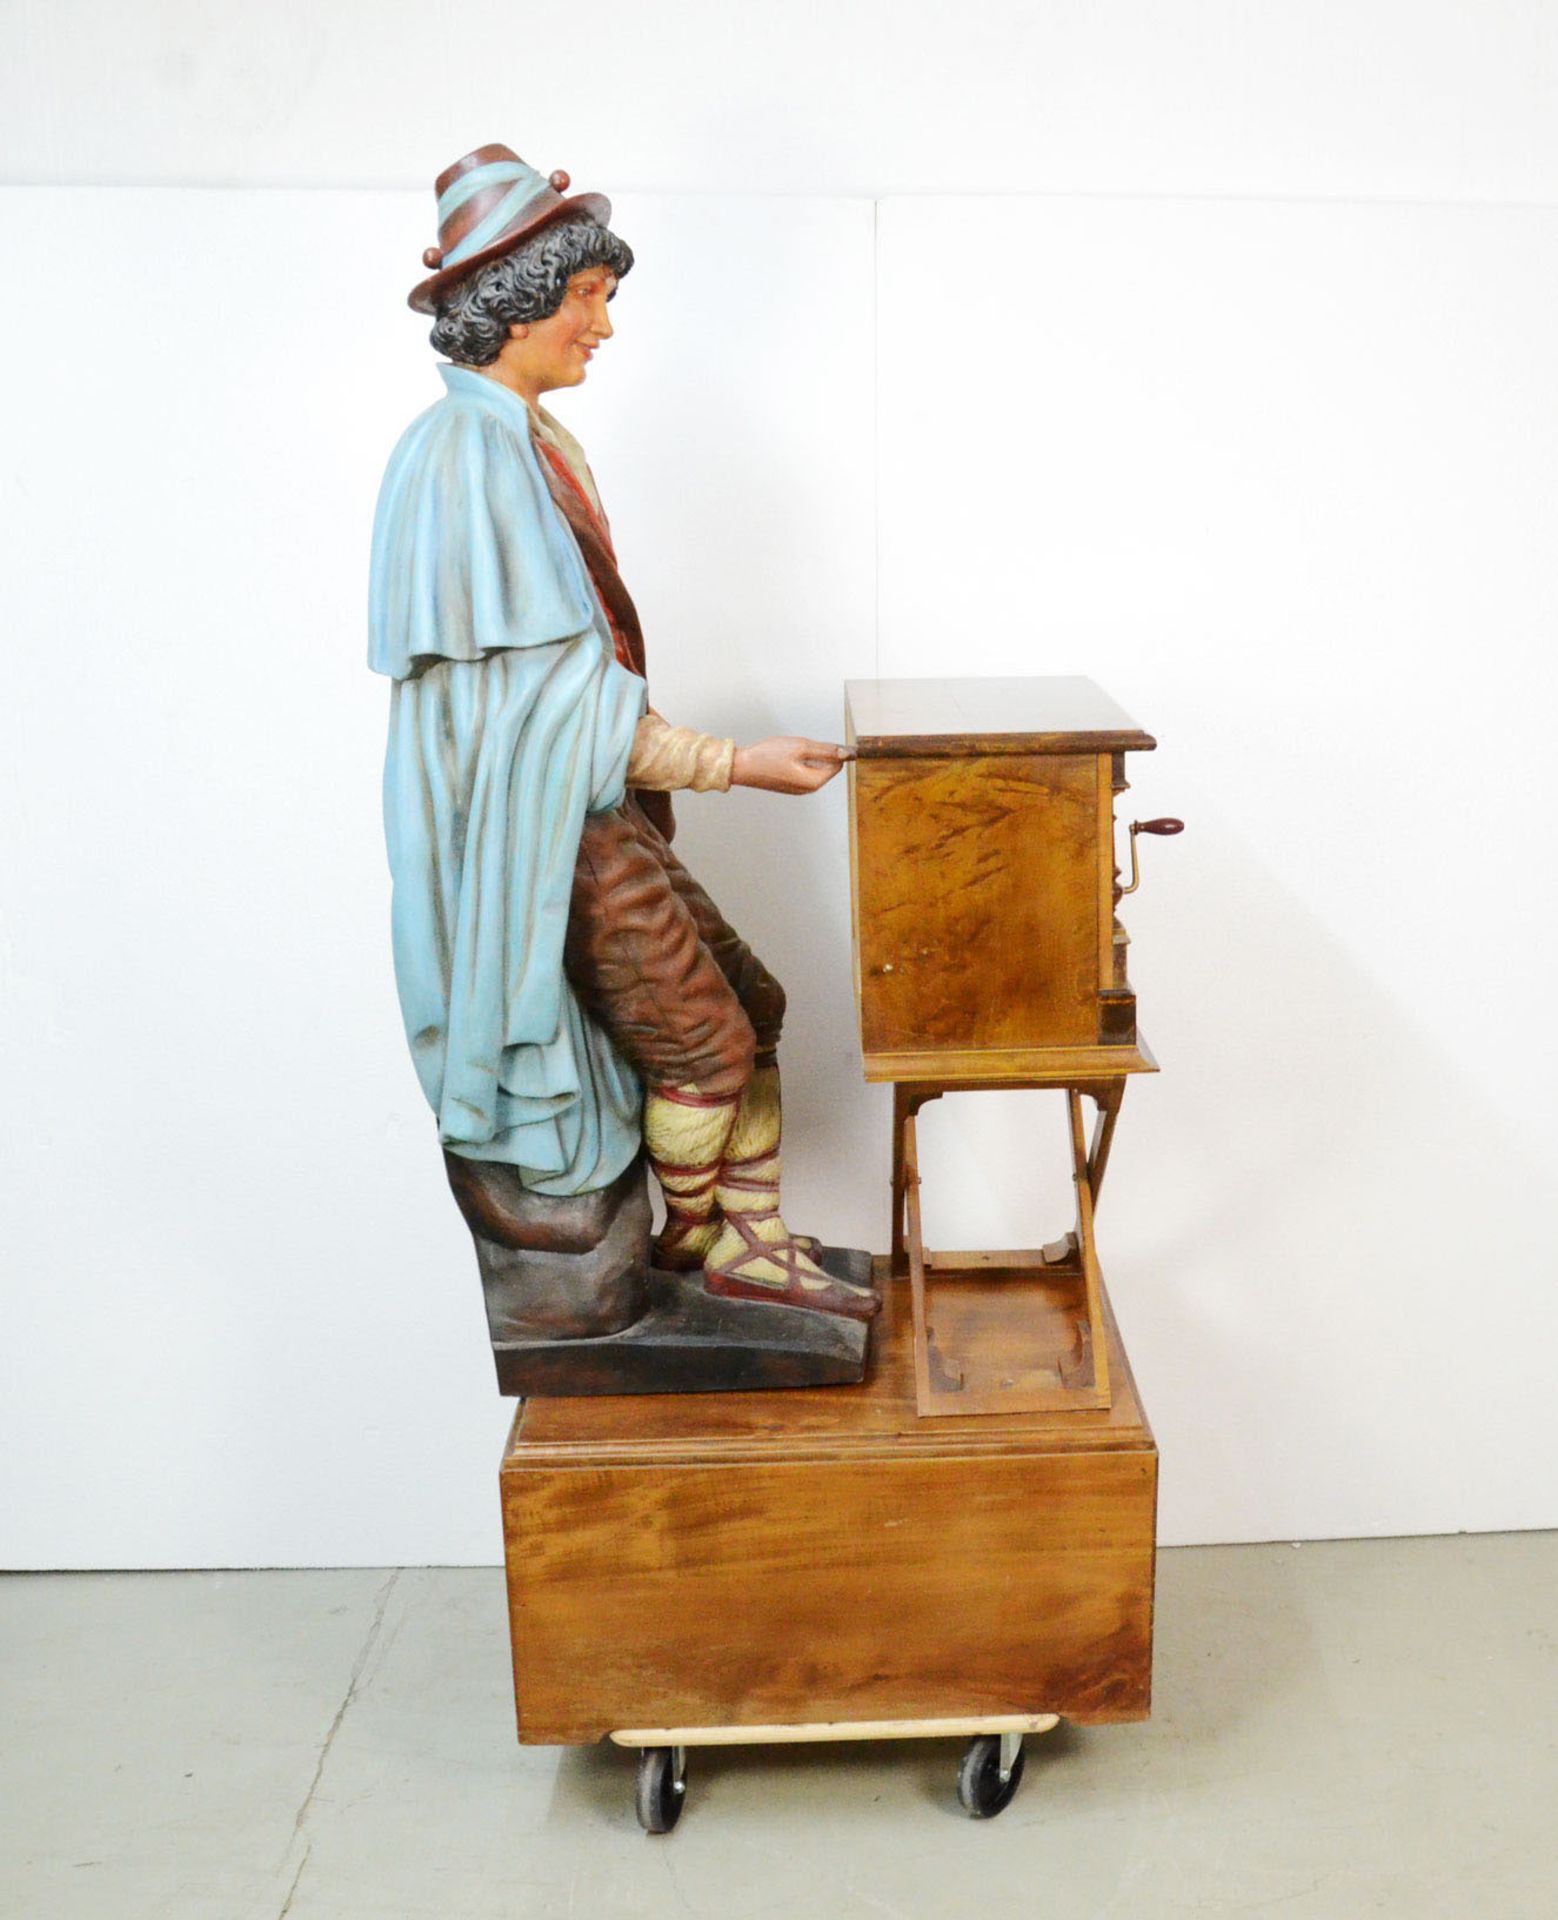 Polyphon Savoyard with a Wooden Figure - Image 3 of 8